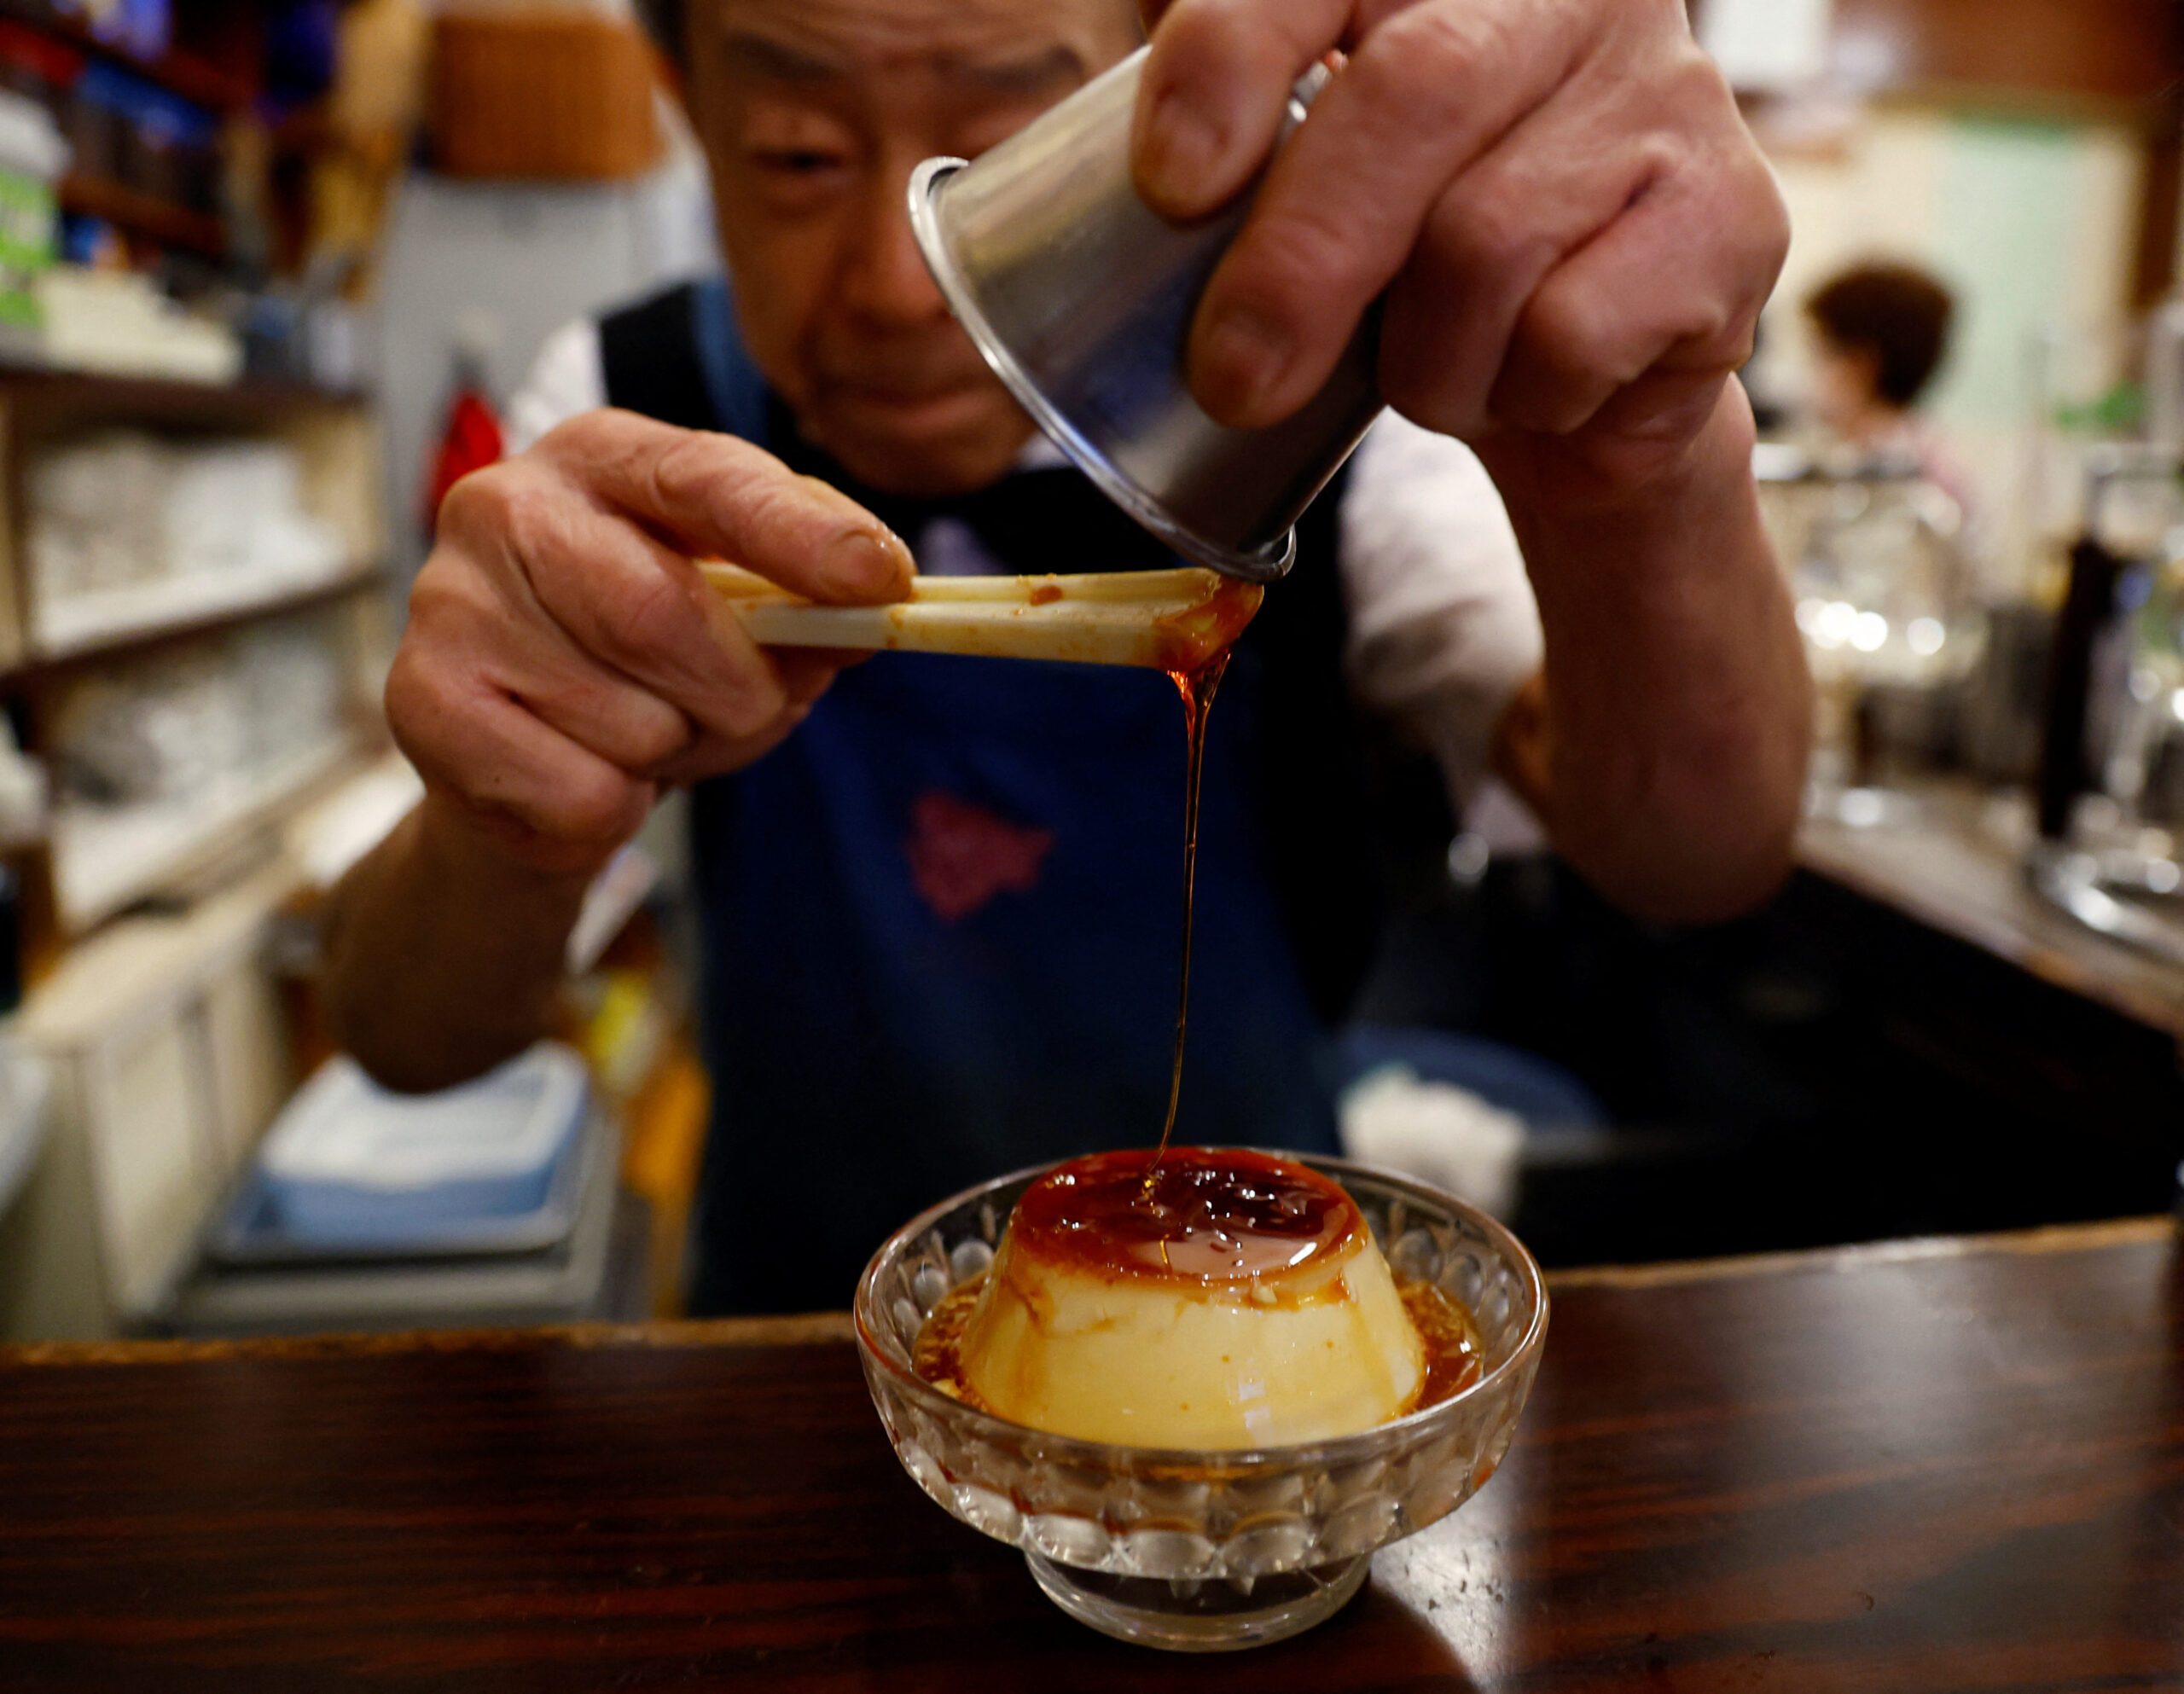 Tokyo coffee shop made famous on Tiktok draws returning tourists hungry for pudding